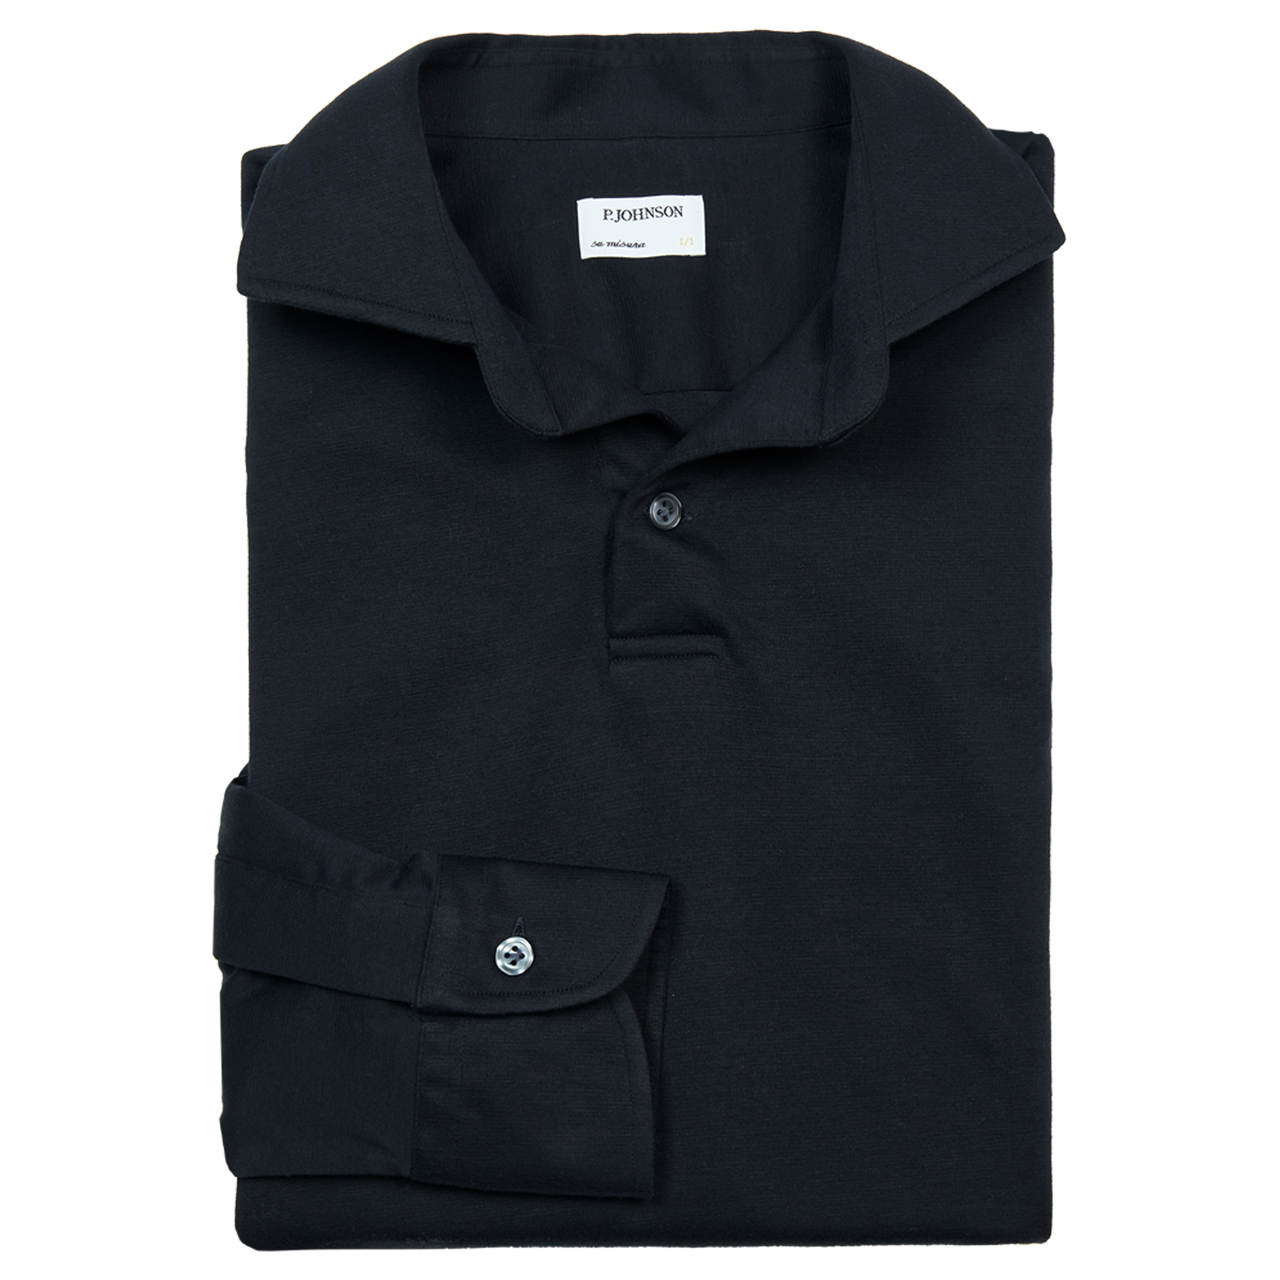 P. Johnson Polo in Navy Cotton Jersey with Cutaway Collar